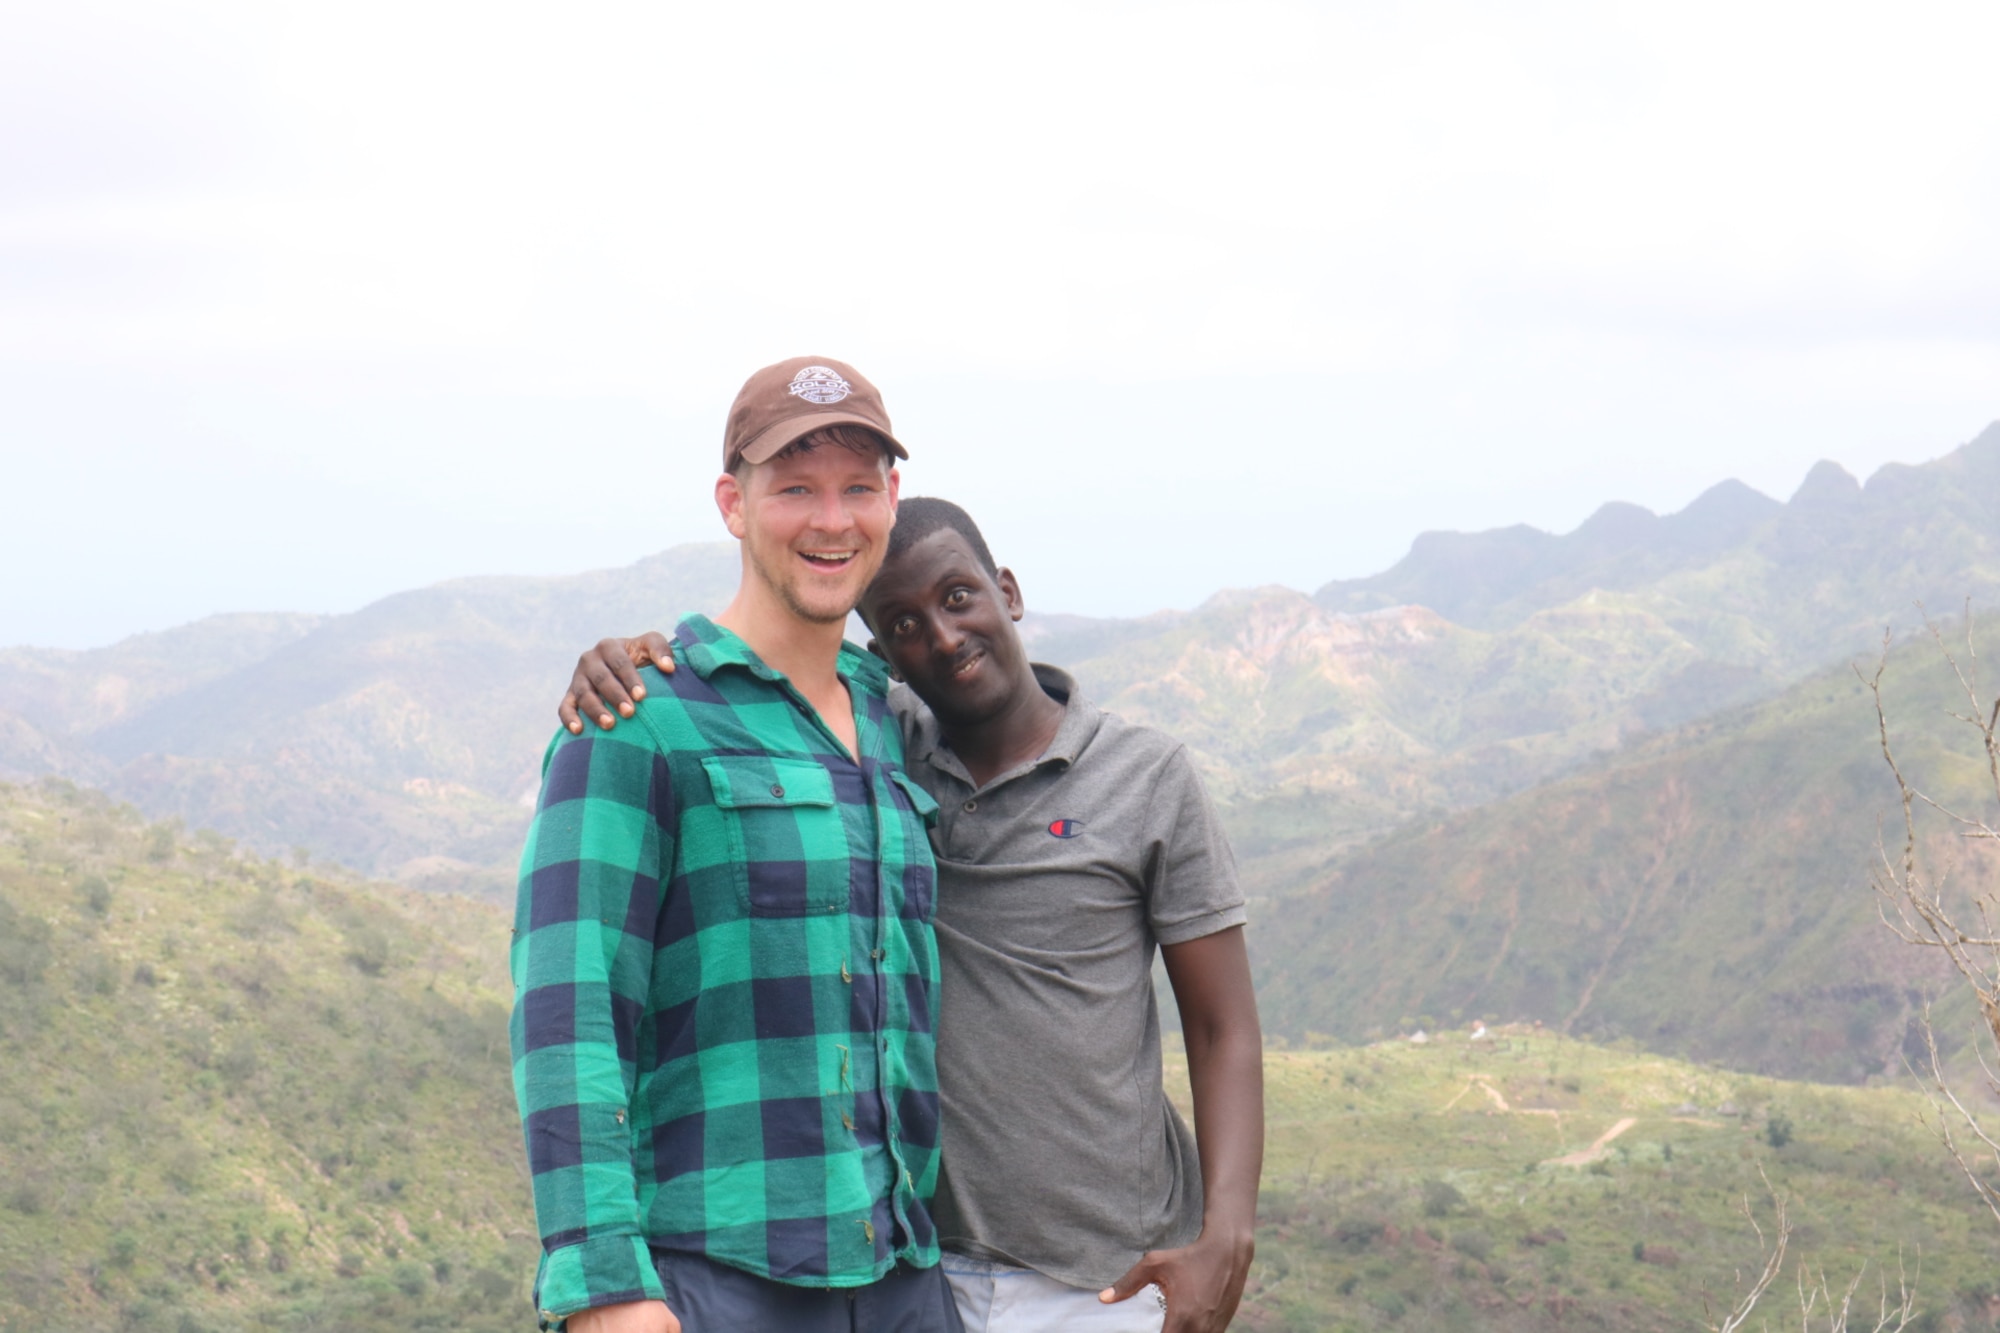 1st Lt. Will Boss, Air Force wildlife ecologist, takes a photo with his guide Mohammad while participating in a wildlife assessment in the Horn of Africa nation of Djibouti in March 2020.